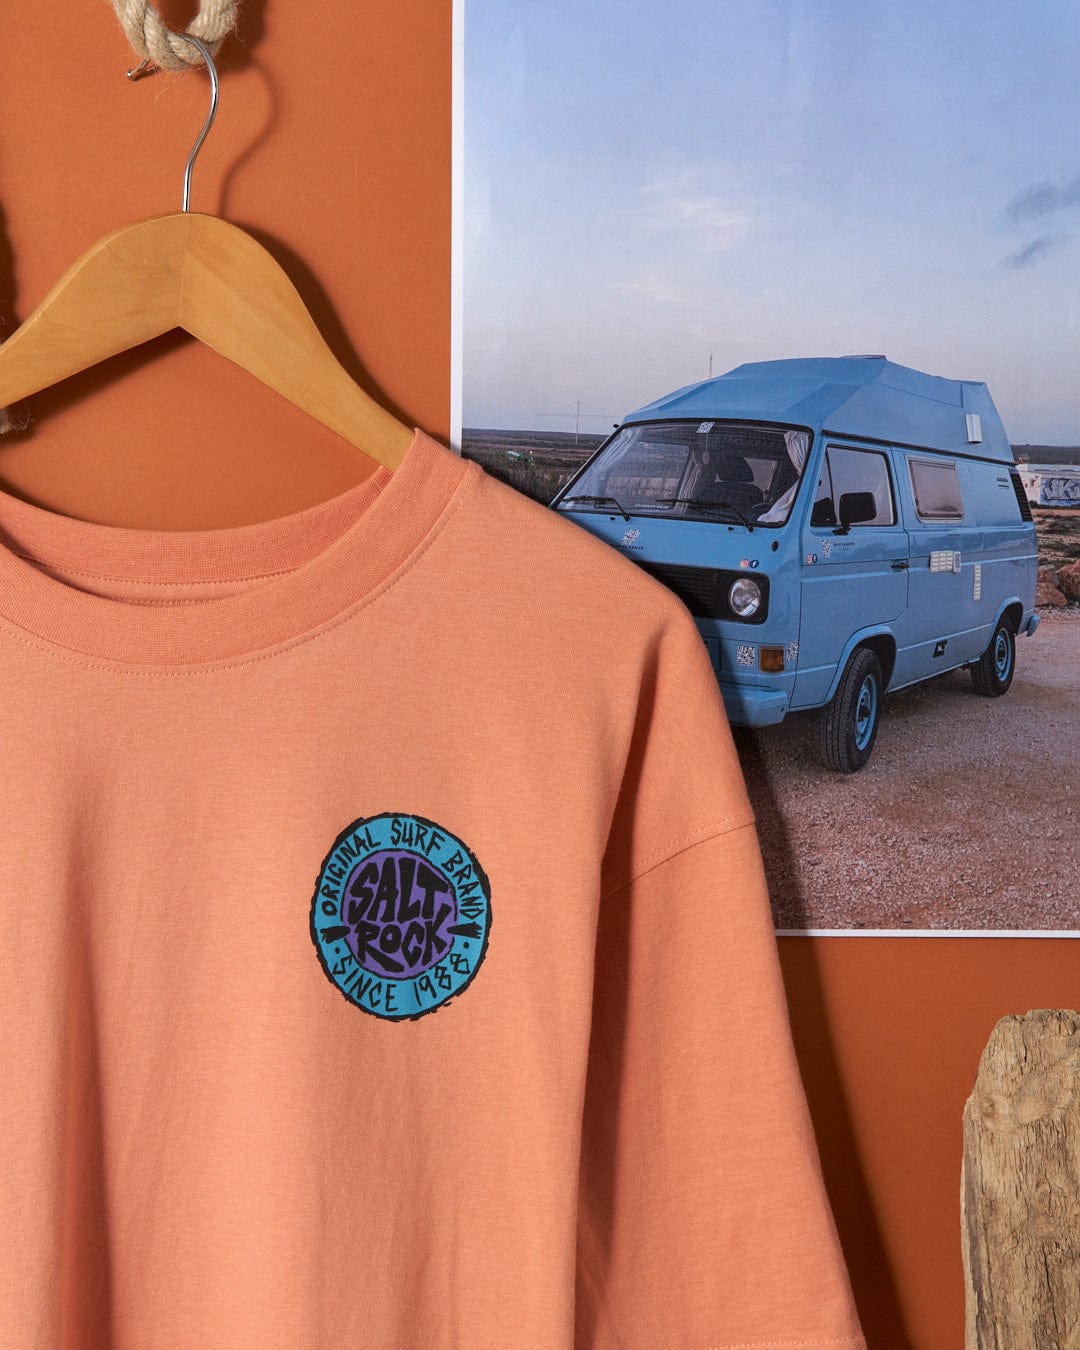 Saltrock salmon-colored oversized t-shirt with "Saltrock retro surf graphic" emblem hanging in front of a camper van photograph.